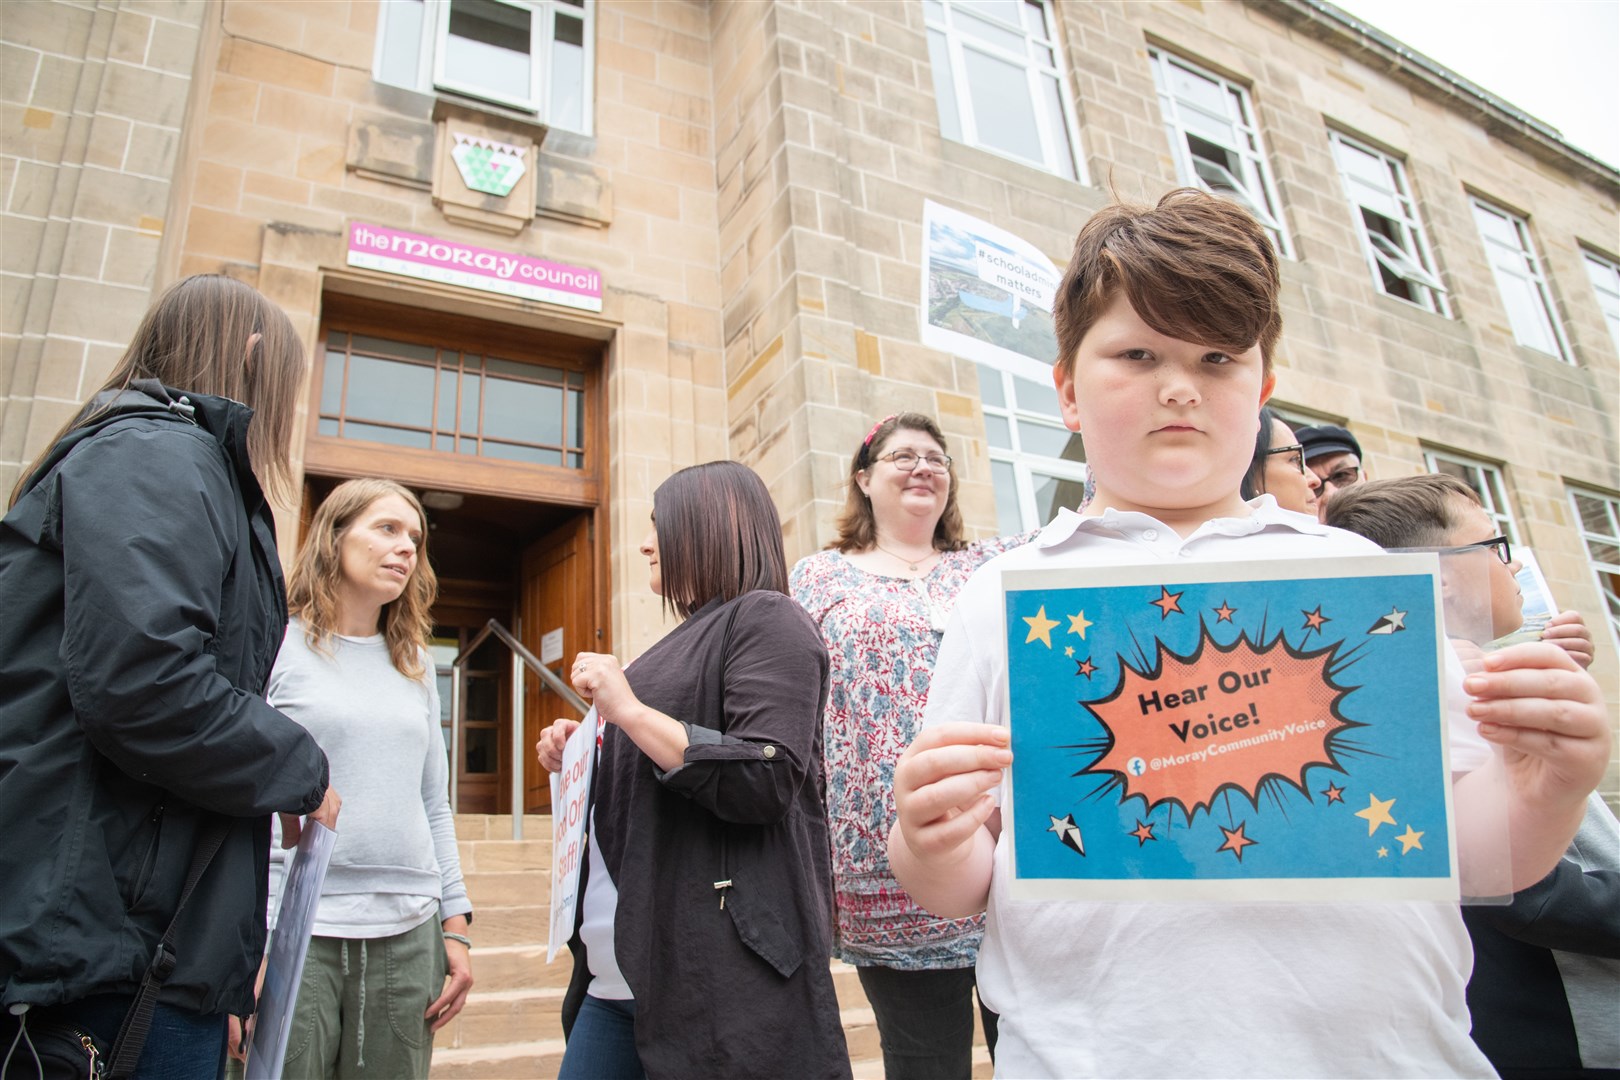 Demonstrators gather outside Moray Council's Headquarters ahead of a full council meeting to protest the proposed cuts to school staff. ..Picture: Daniel Forsyth..